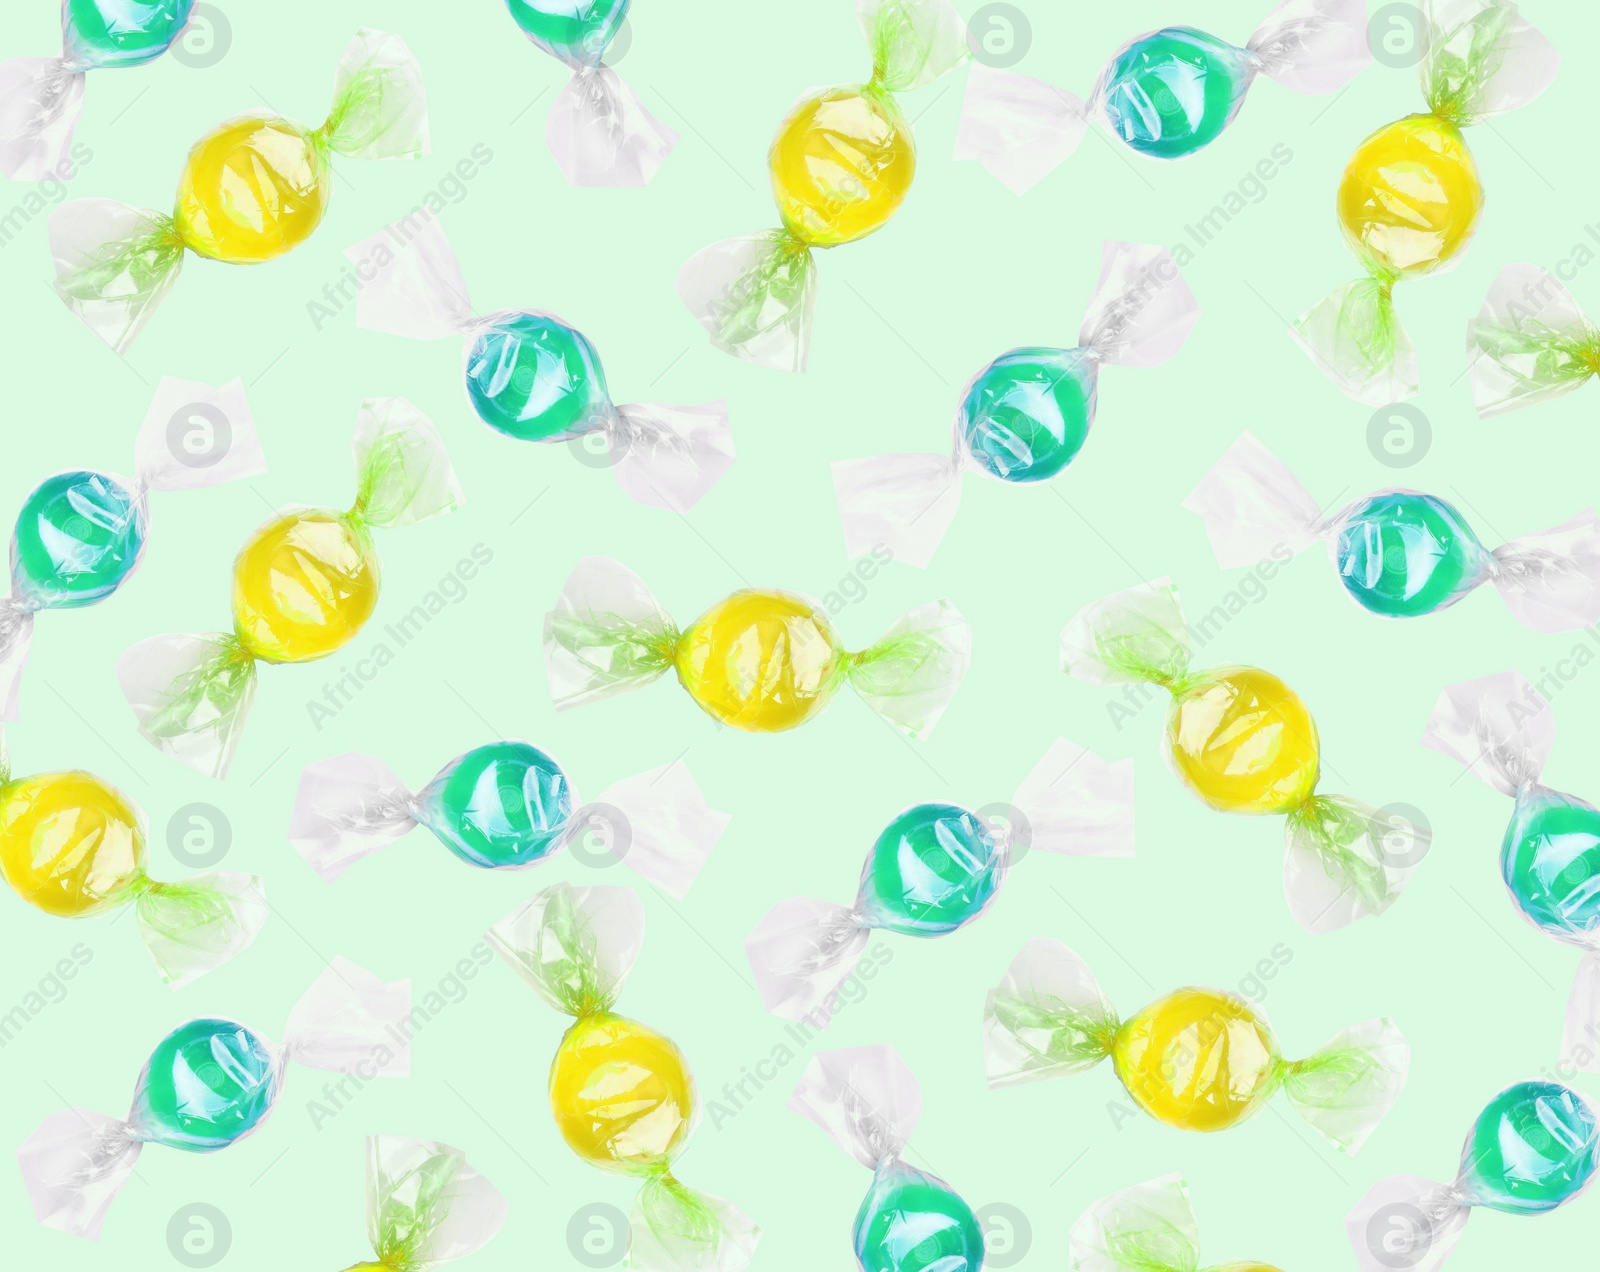 Image of Tasty candies on pale light green background. Pattern design